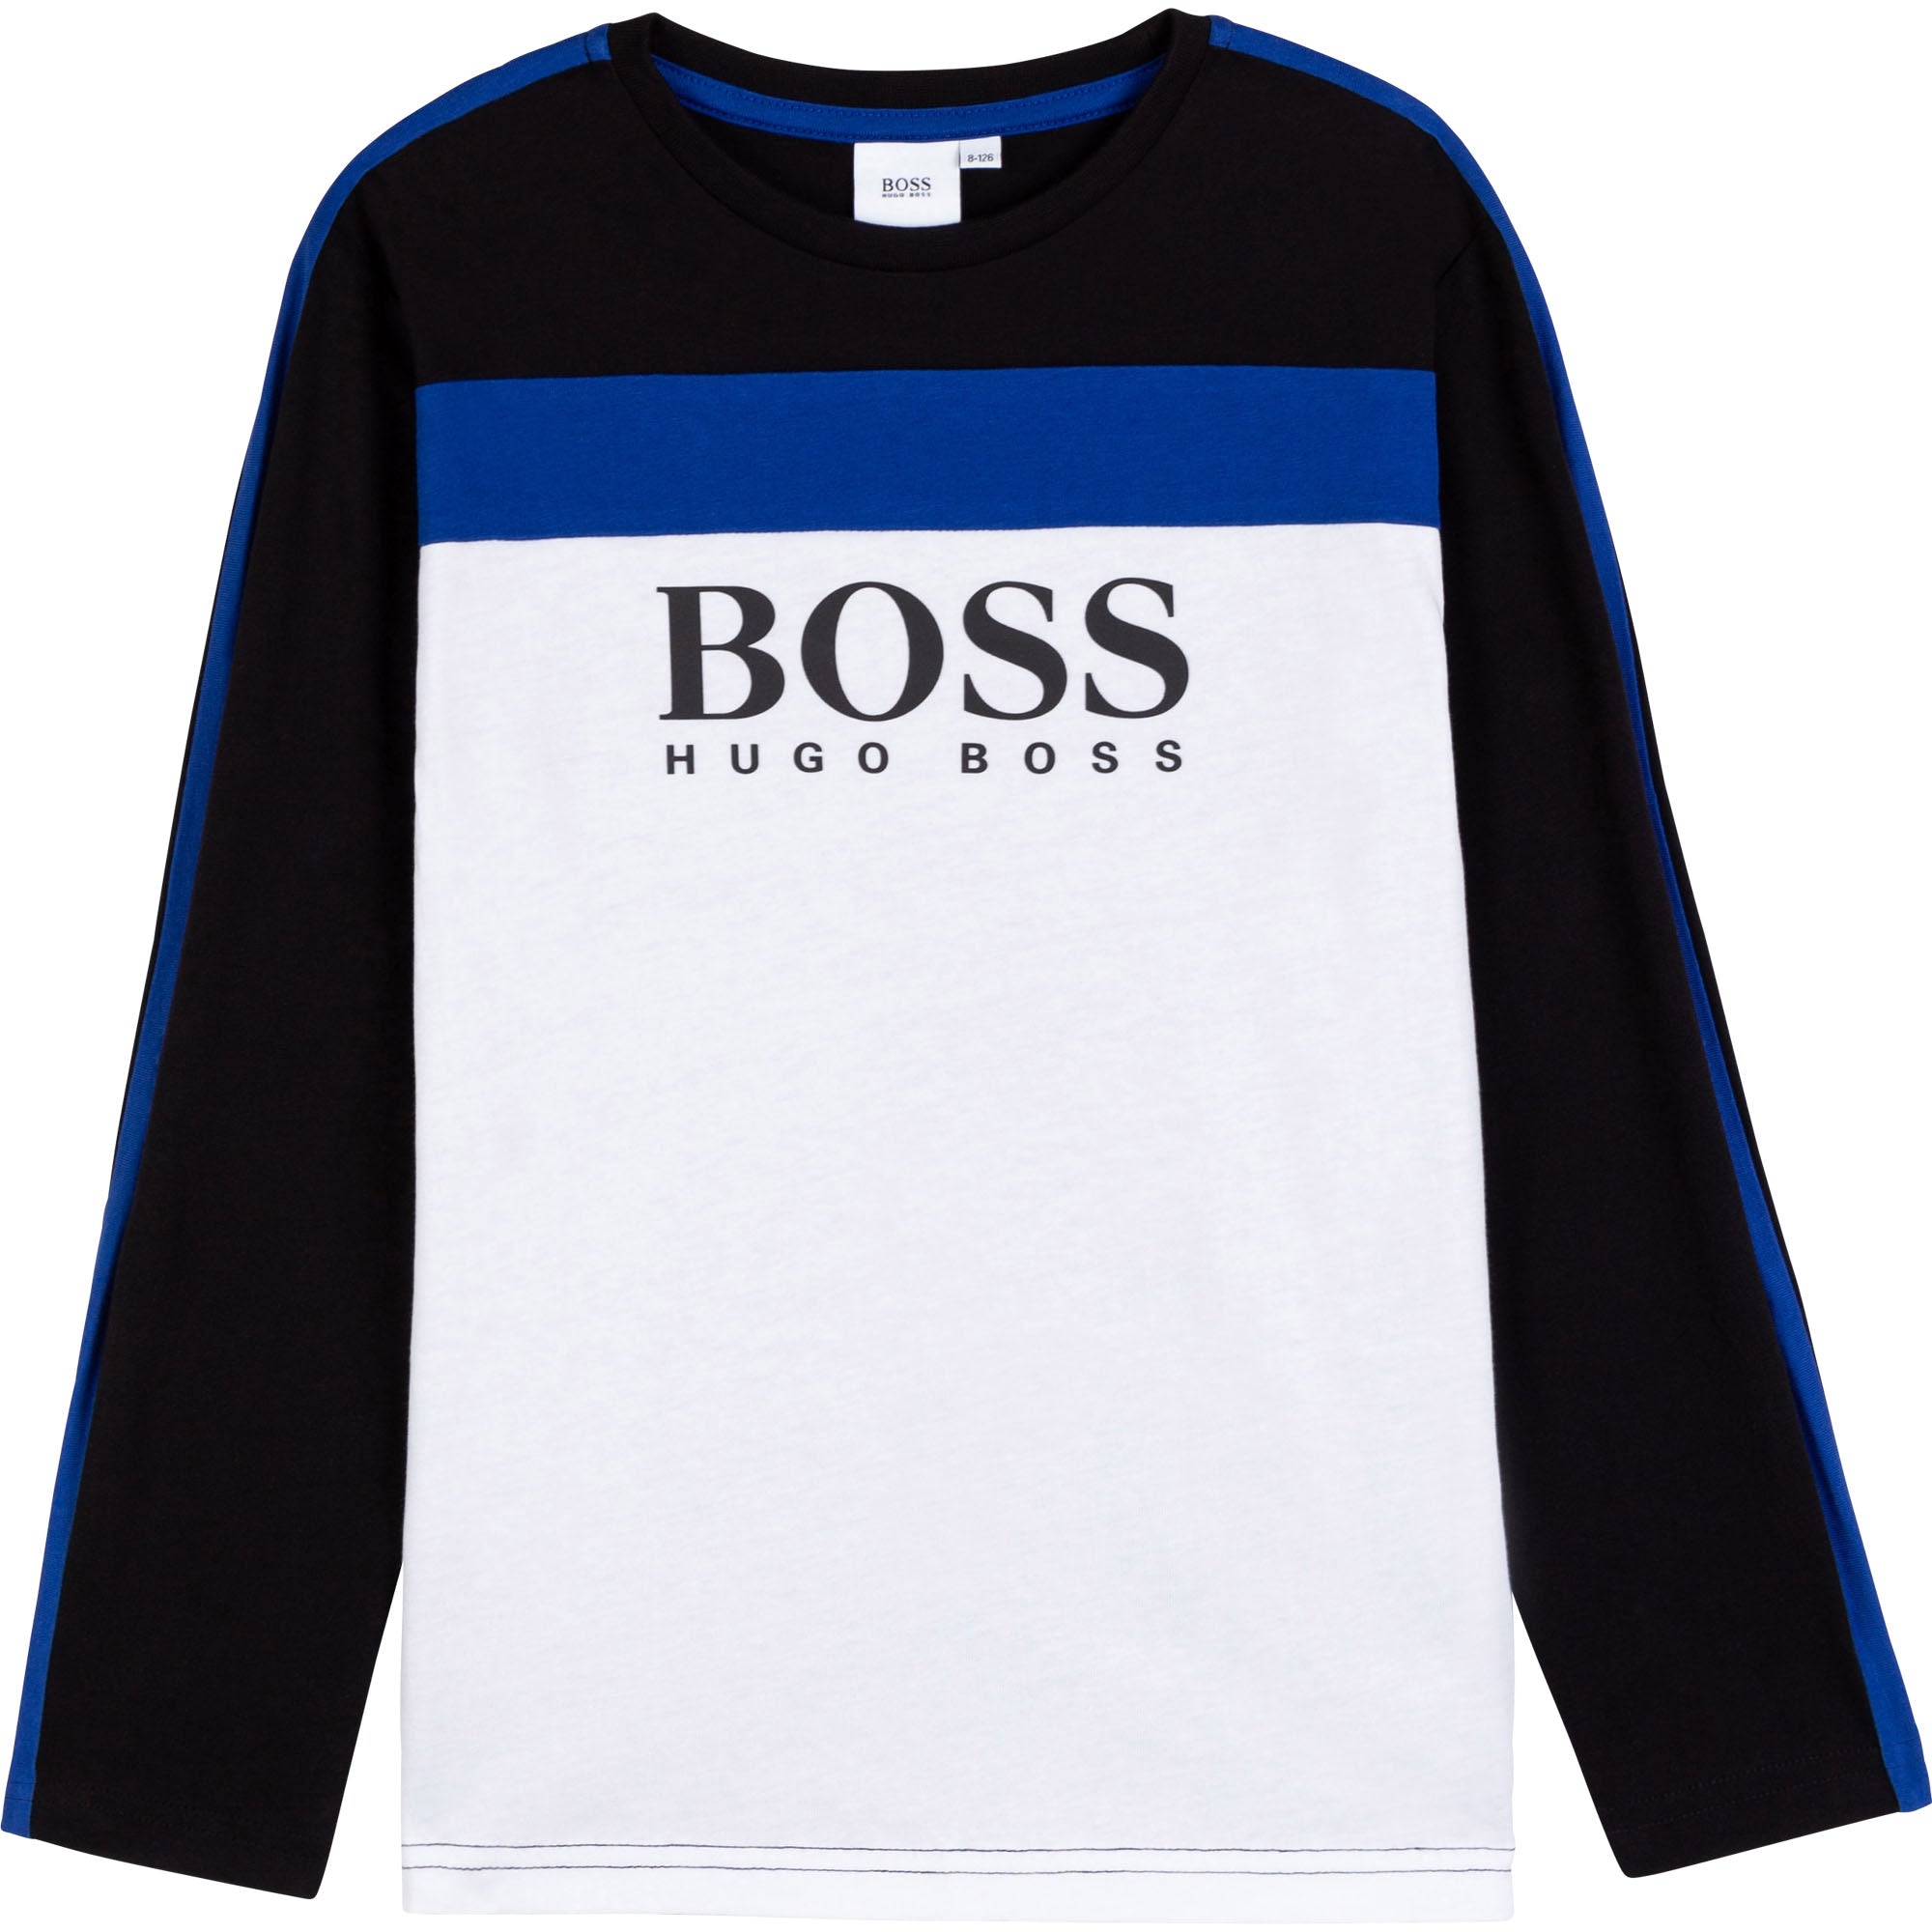 BOYS LS TEE COLOR BLOCK WITH LOGO, WHITE